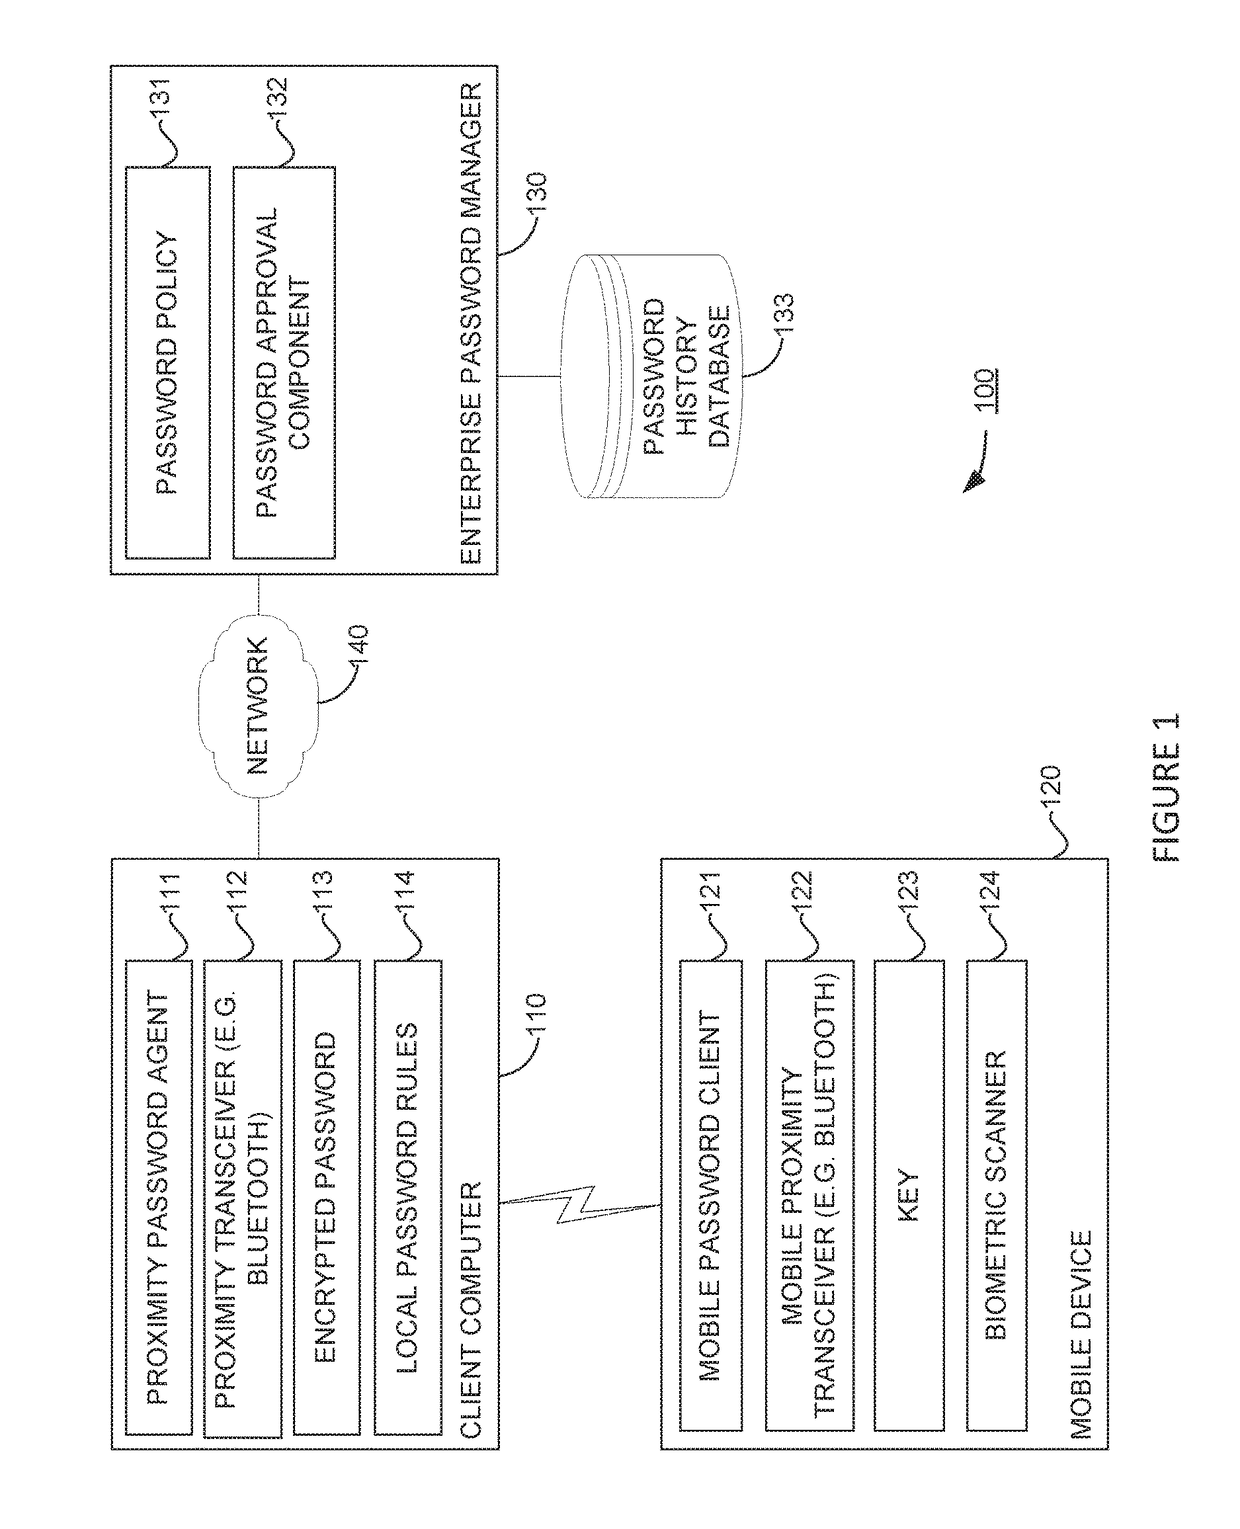 Systems and methods to enable automatic password management in a proximity based authentication